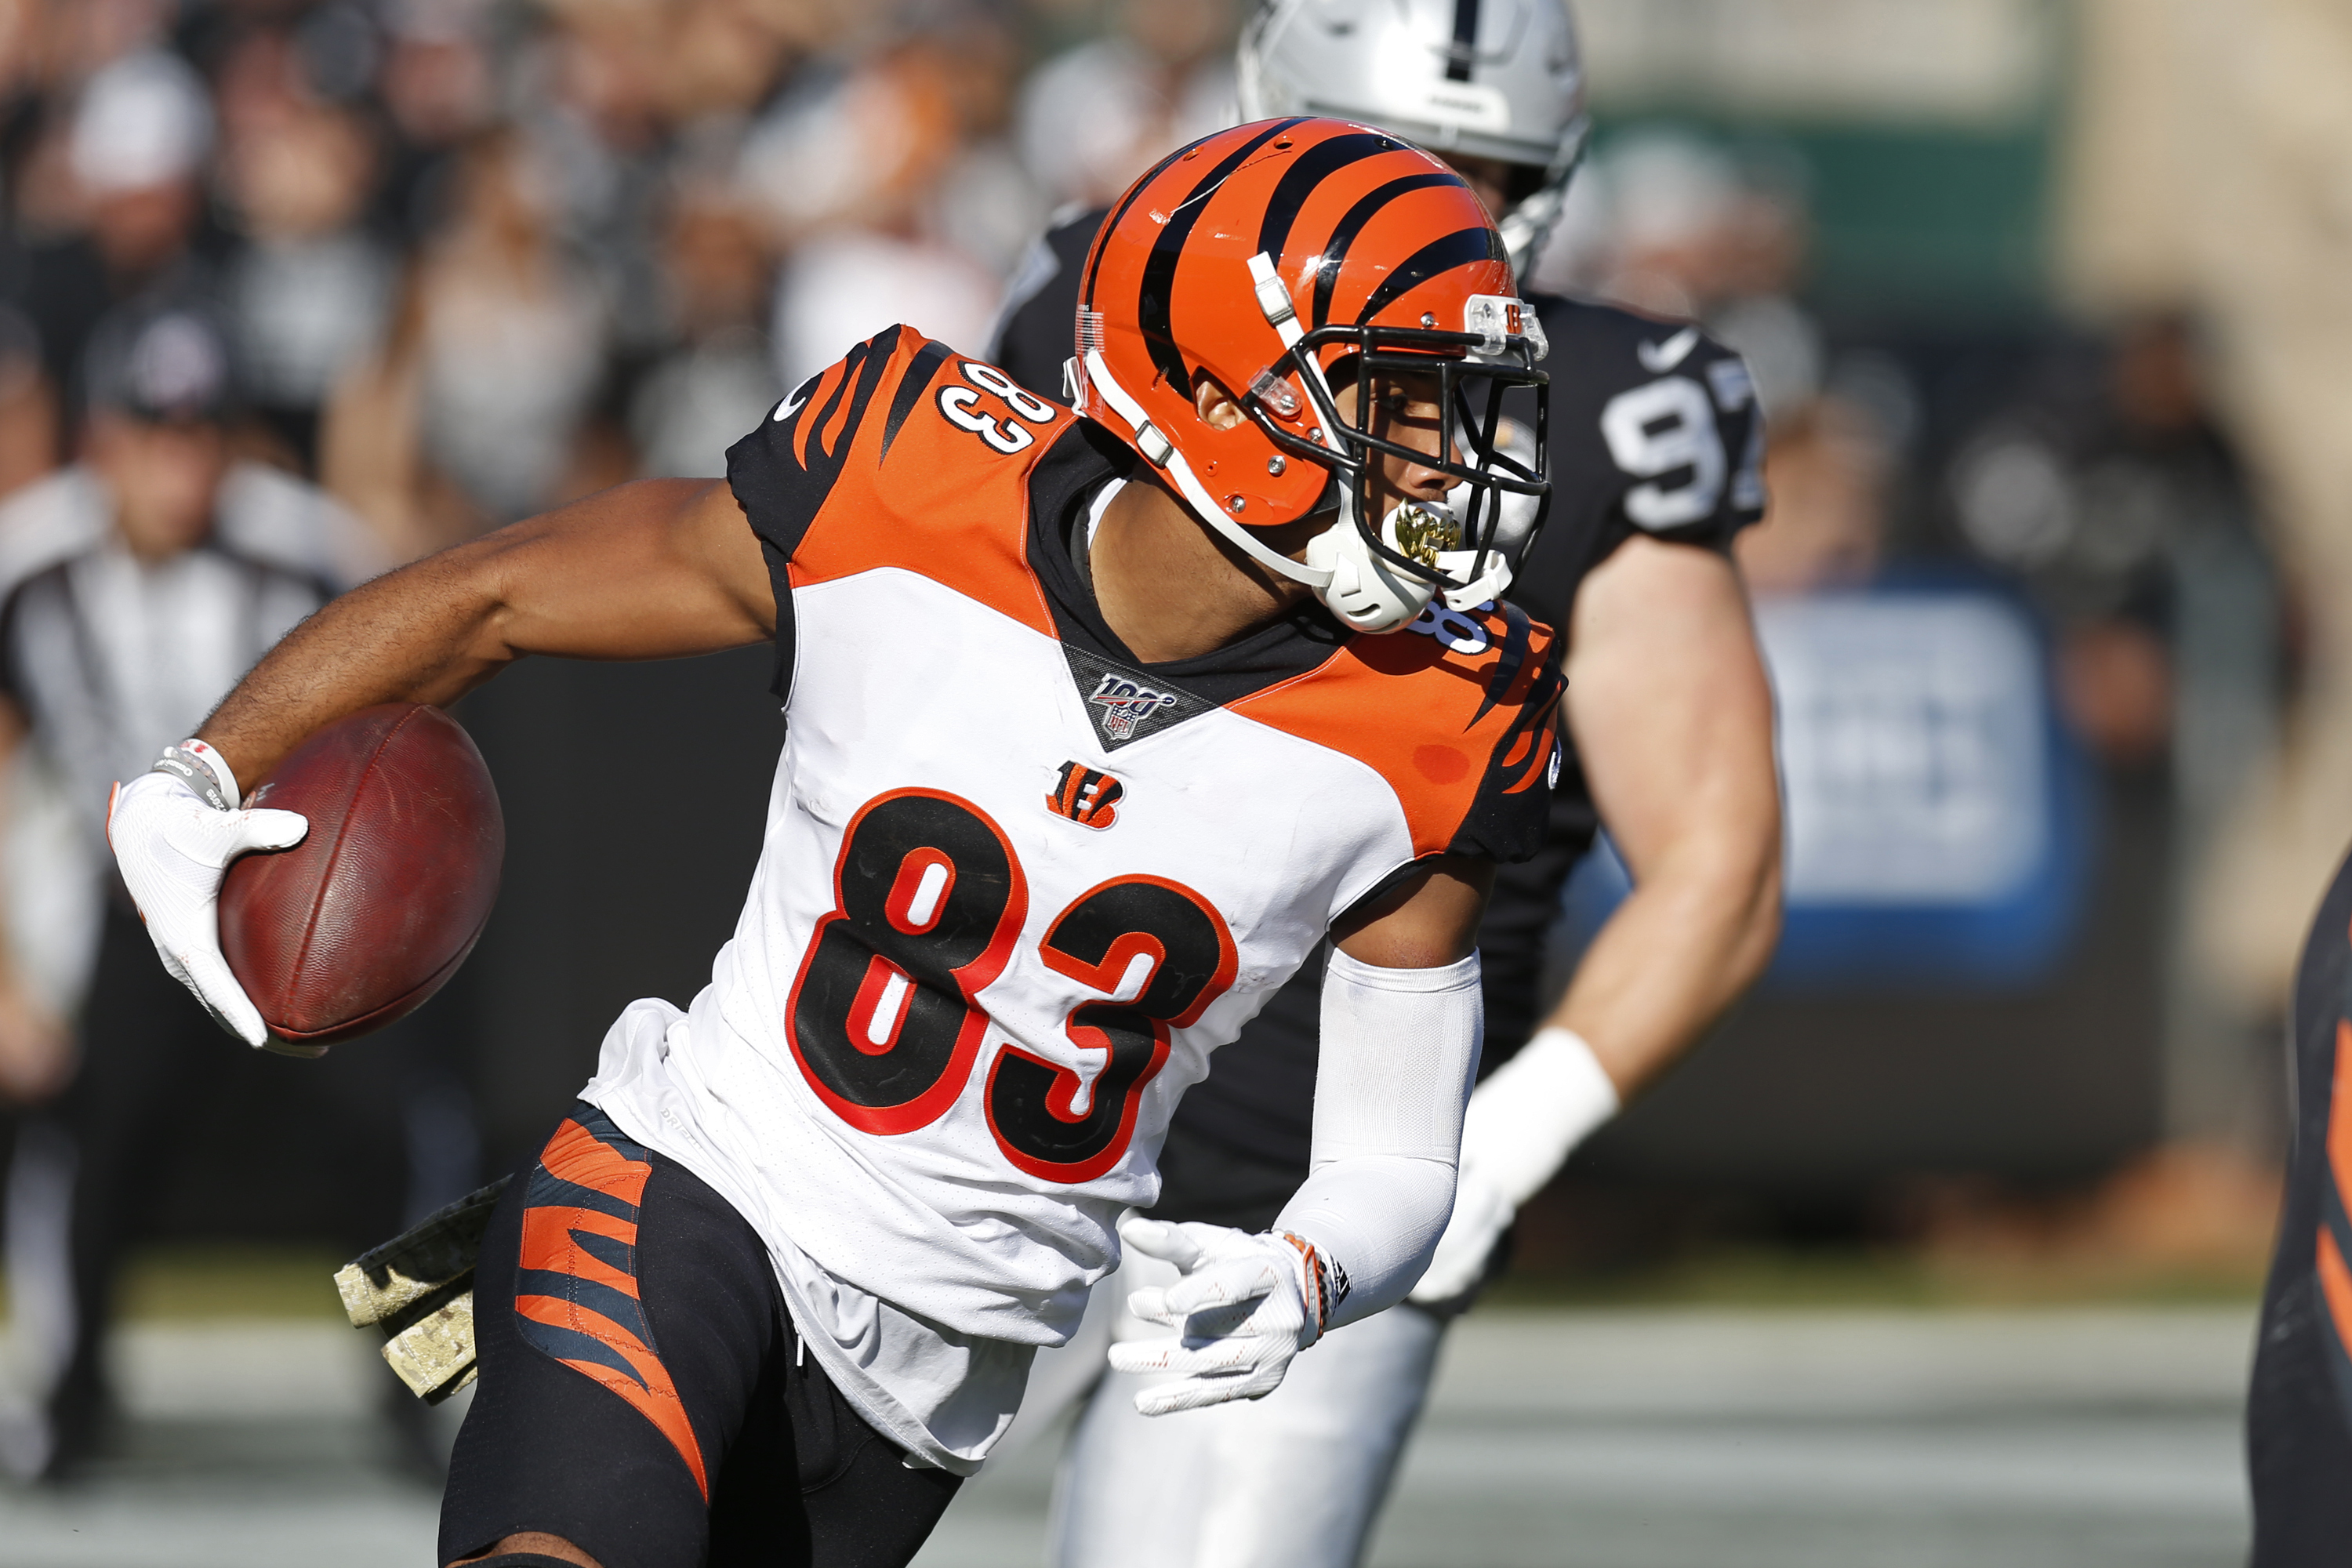 Extended absence' for Bengals' Boyd not likely, per report